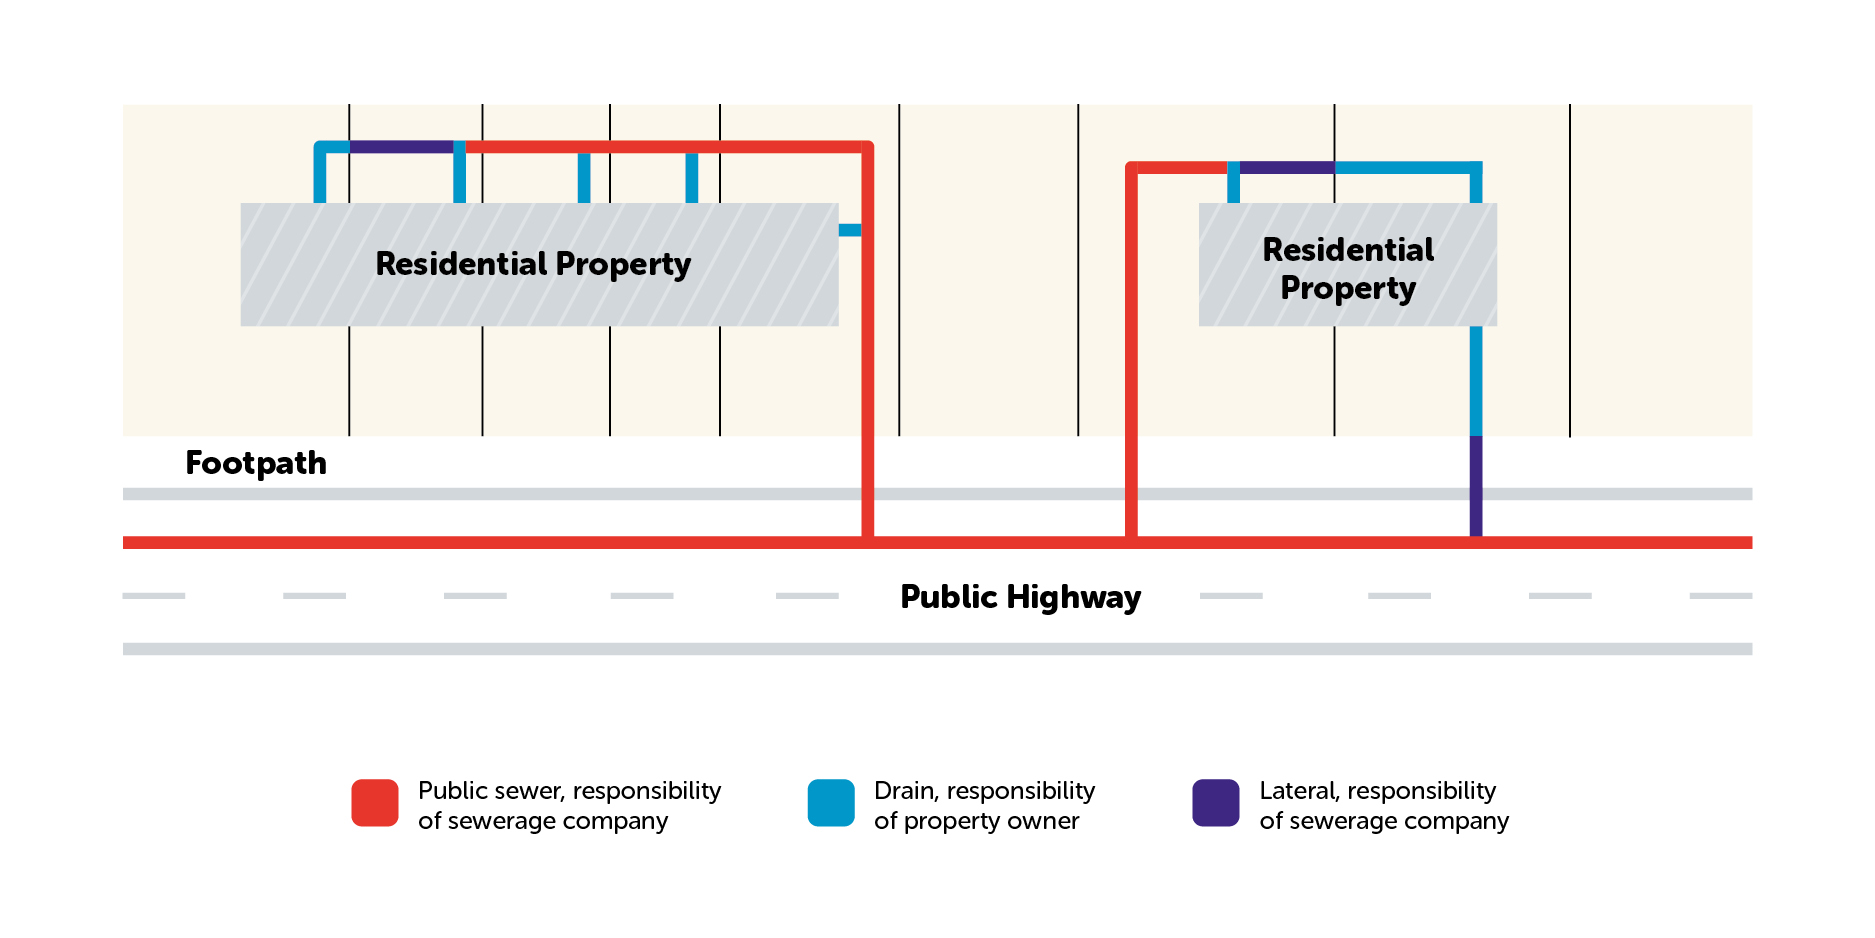 Diagram showing the layout of a water supply network. It shows how the responsibility of pipe maintenance is split between residential owners and sewage companies. 